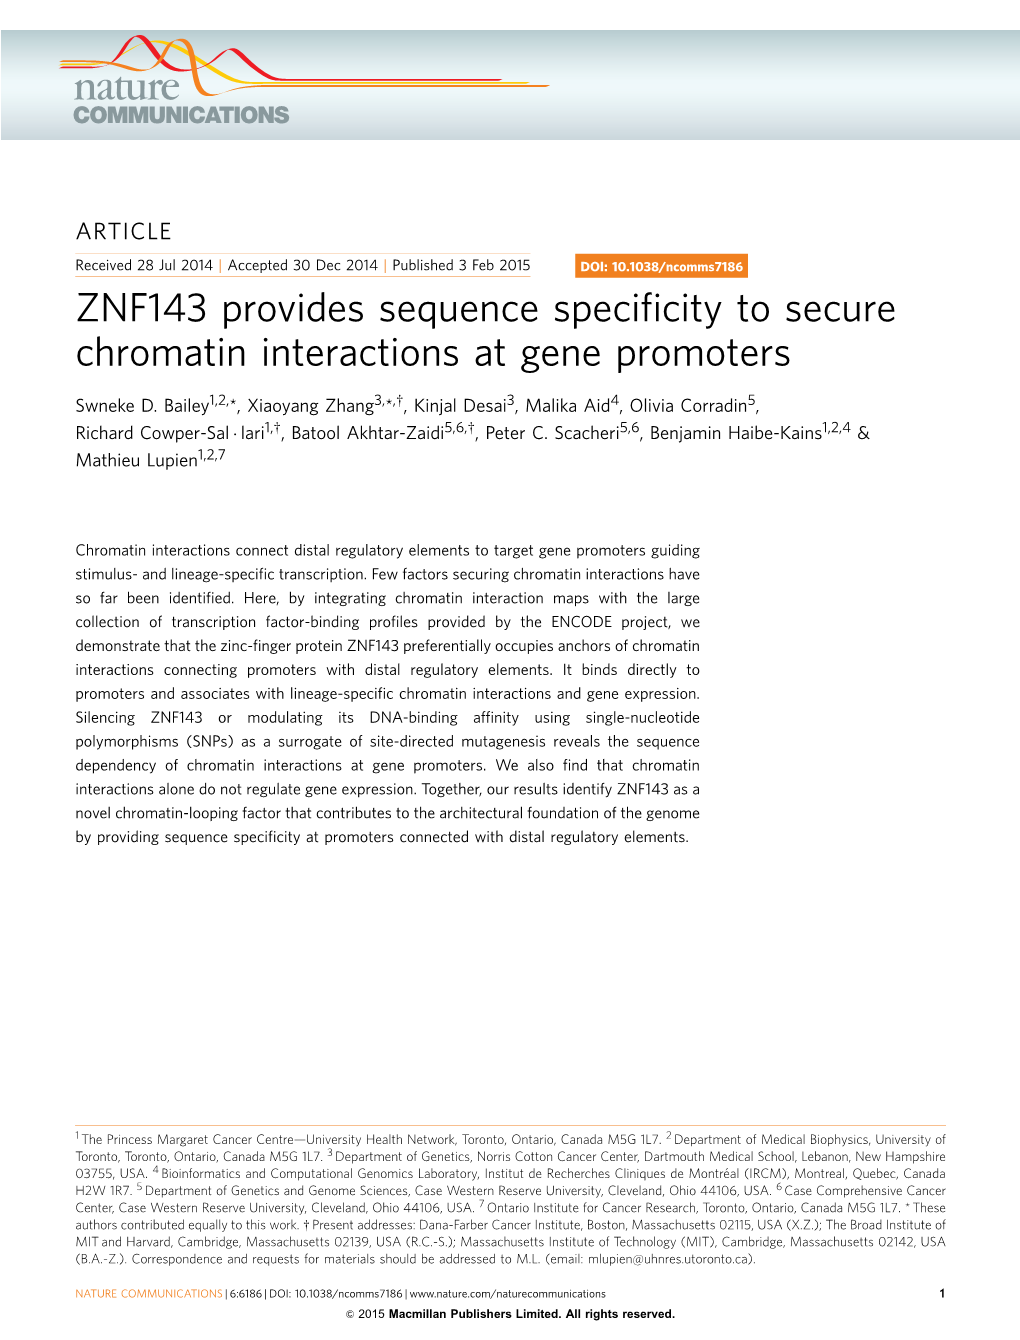 ZNF143 Provides Sequence Specificity to Secure Chromatin Interactions At